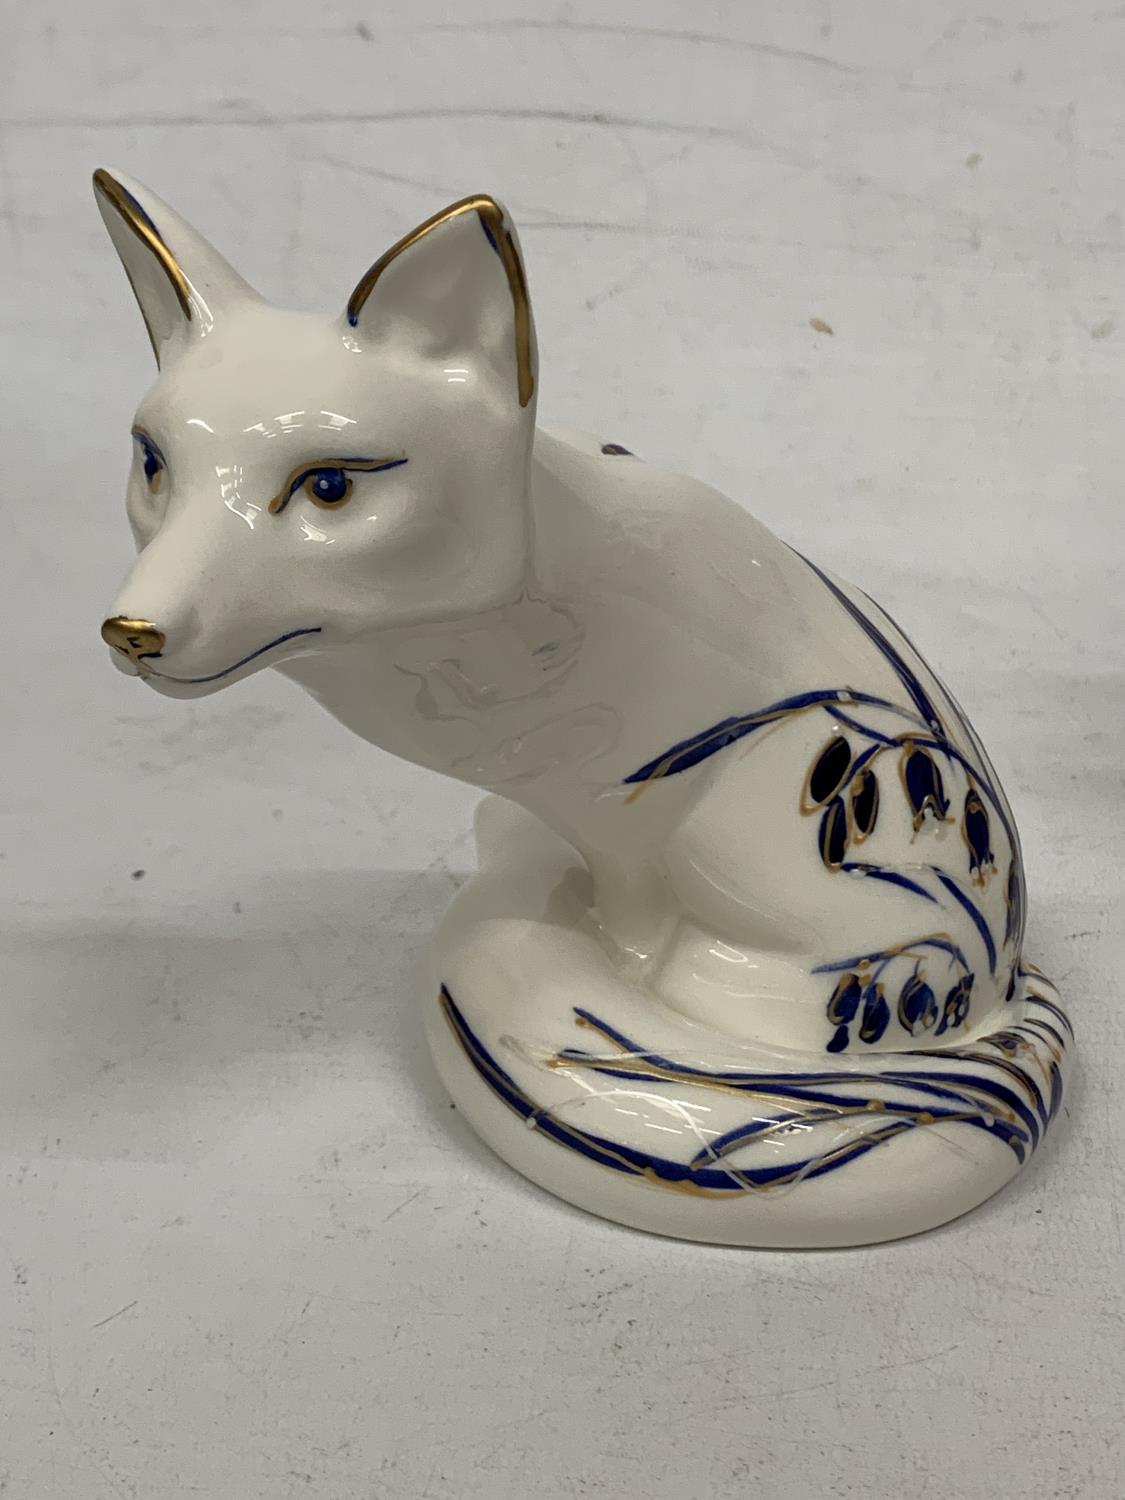 AN ANITA HARRIS FOX (BLUEBELL'S) SIGNED IN GOLD